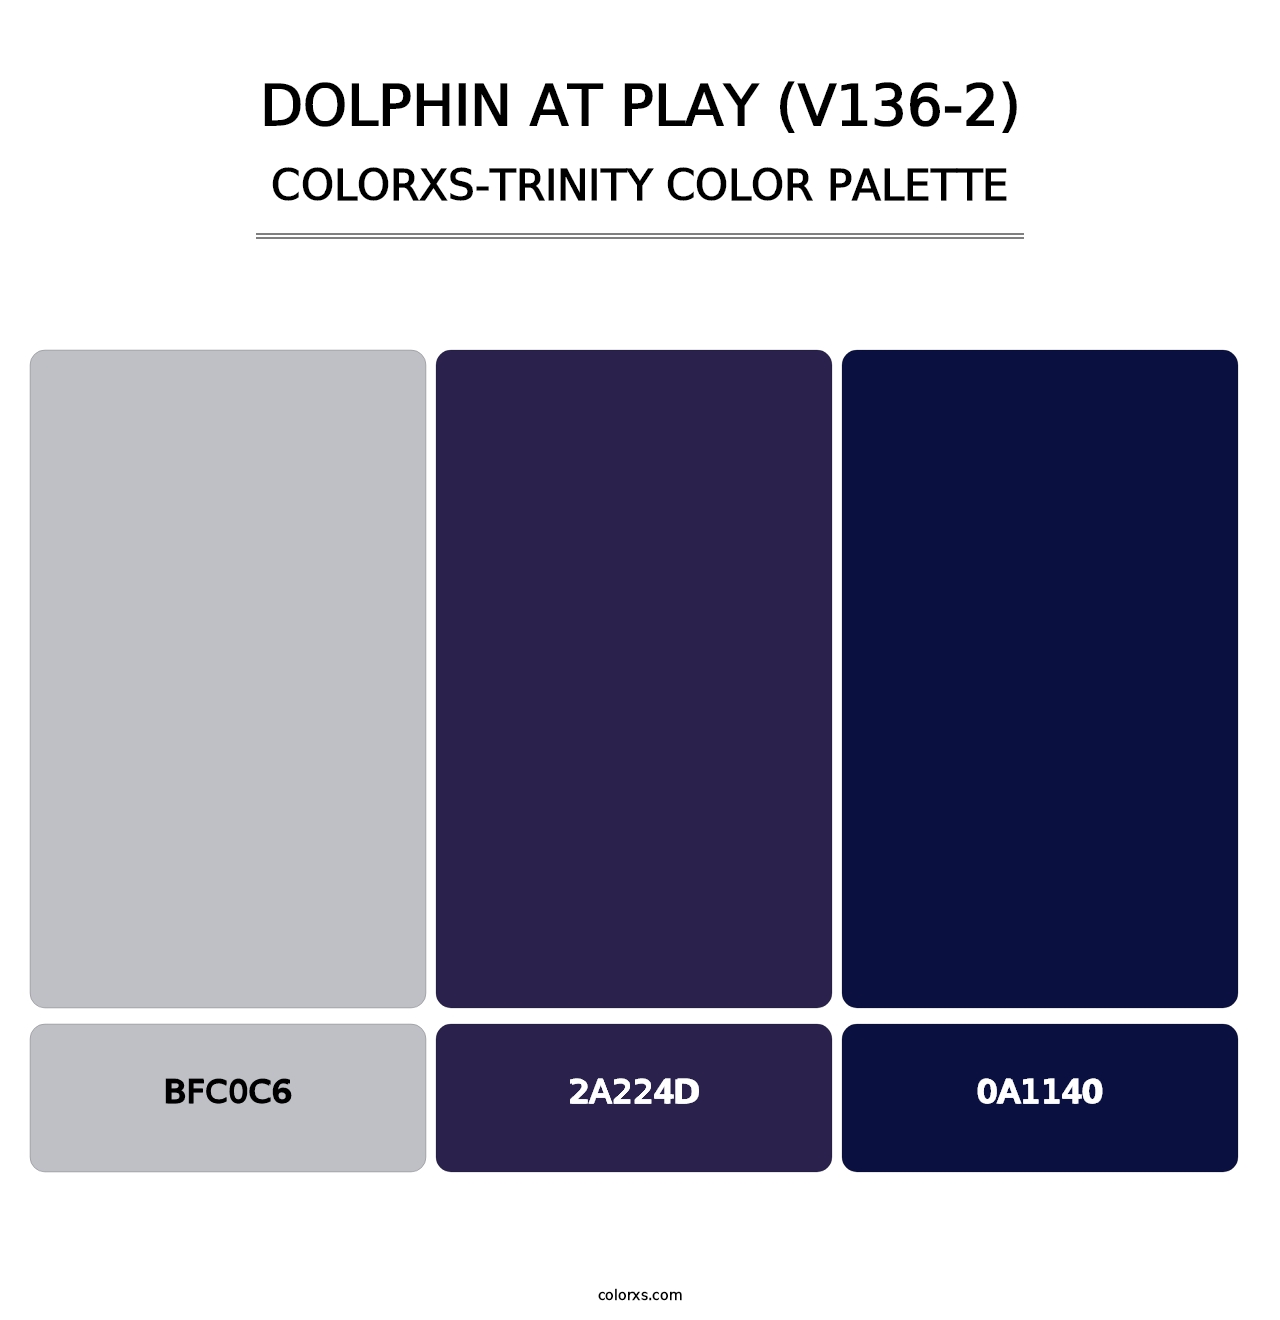 Dolphin at Play (V136-2) - Colorxs Trinity Palette